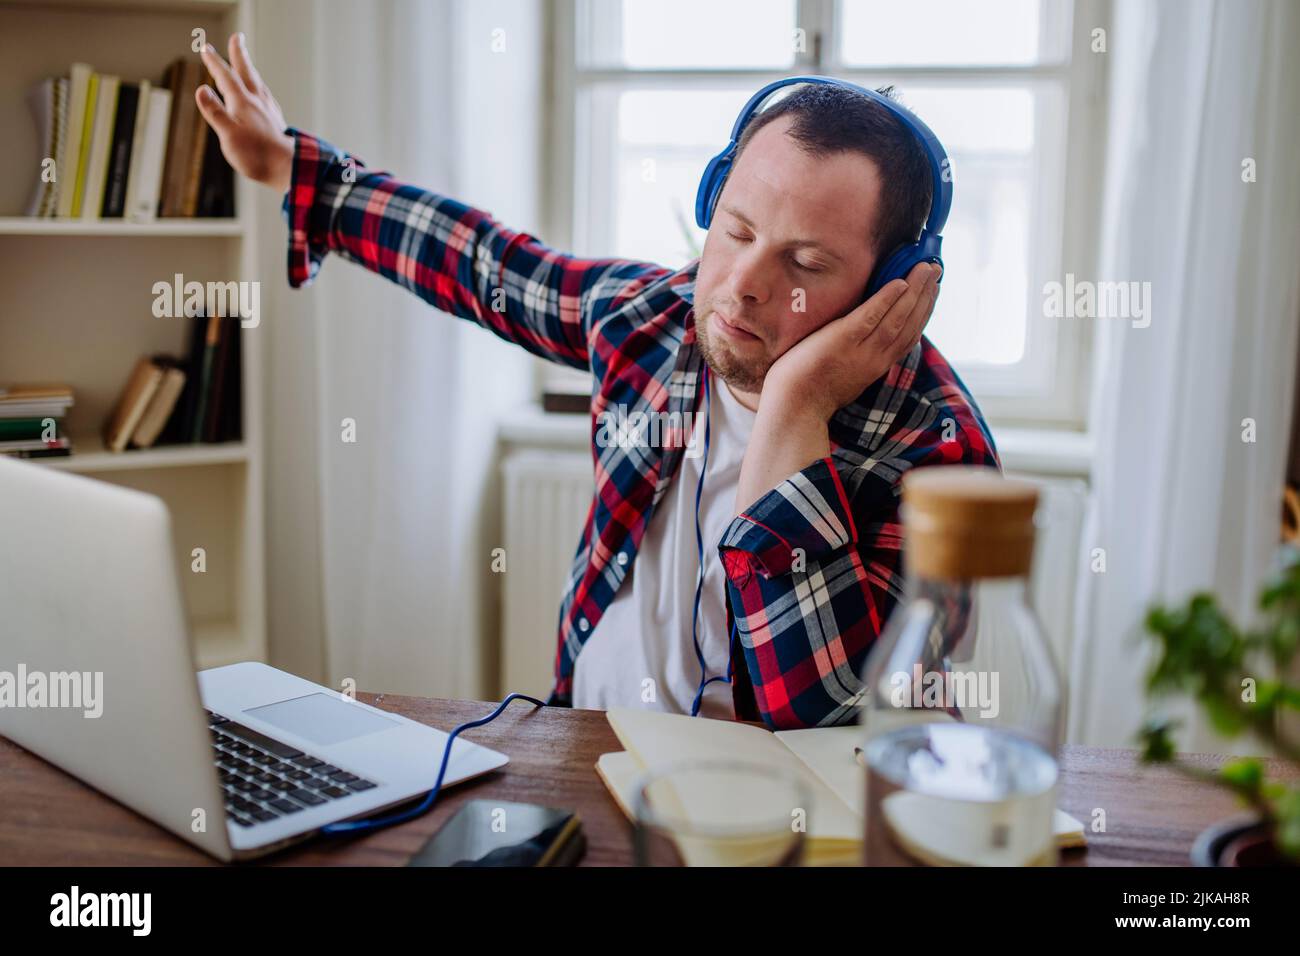 Young man with Down syndrome sitting at desk in office and using laptop, listening to music from headphones. Stock Photo